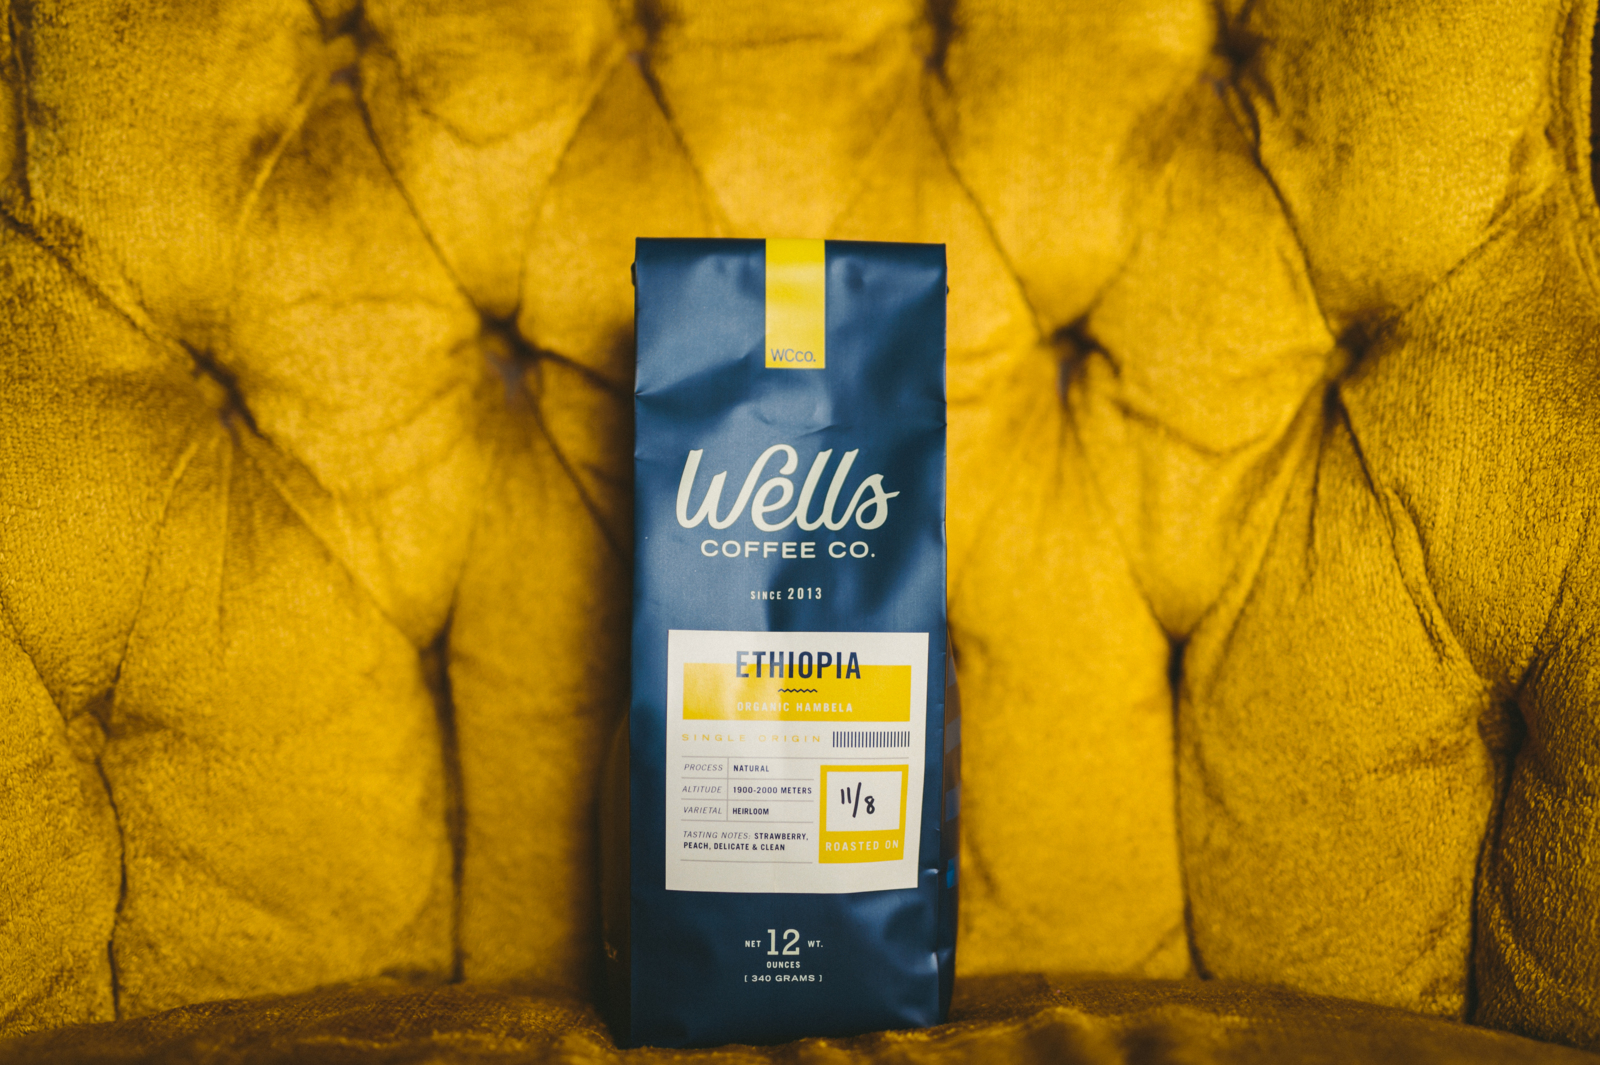 Bag of Ethiopia version of coffee from Wells Coffee Co on display on mustard colored plush chair